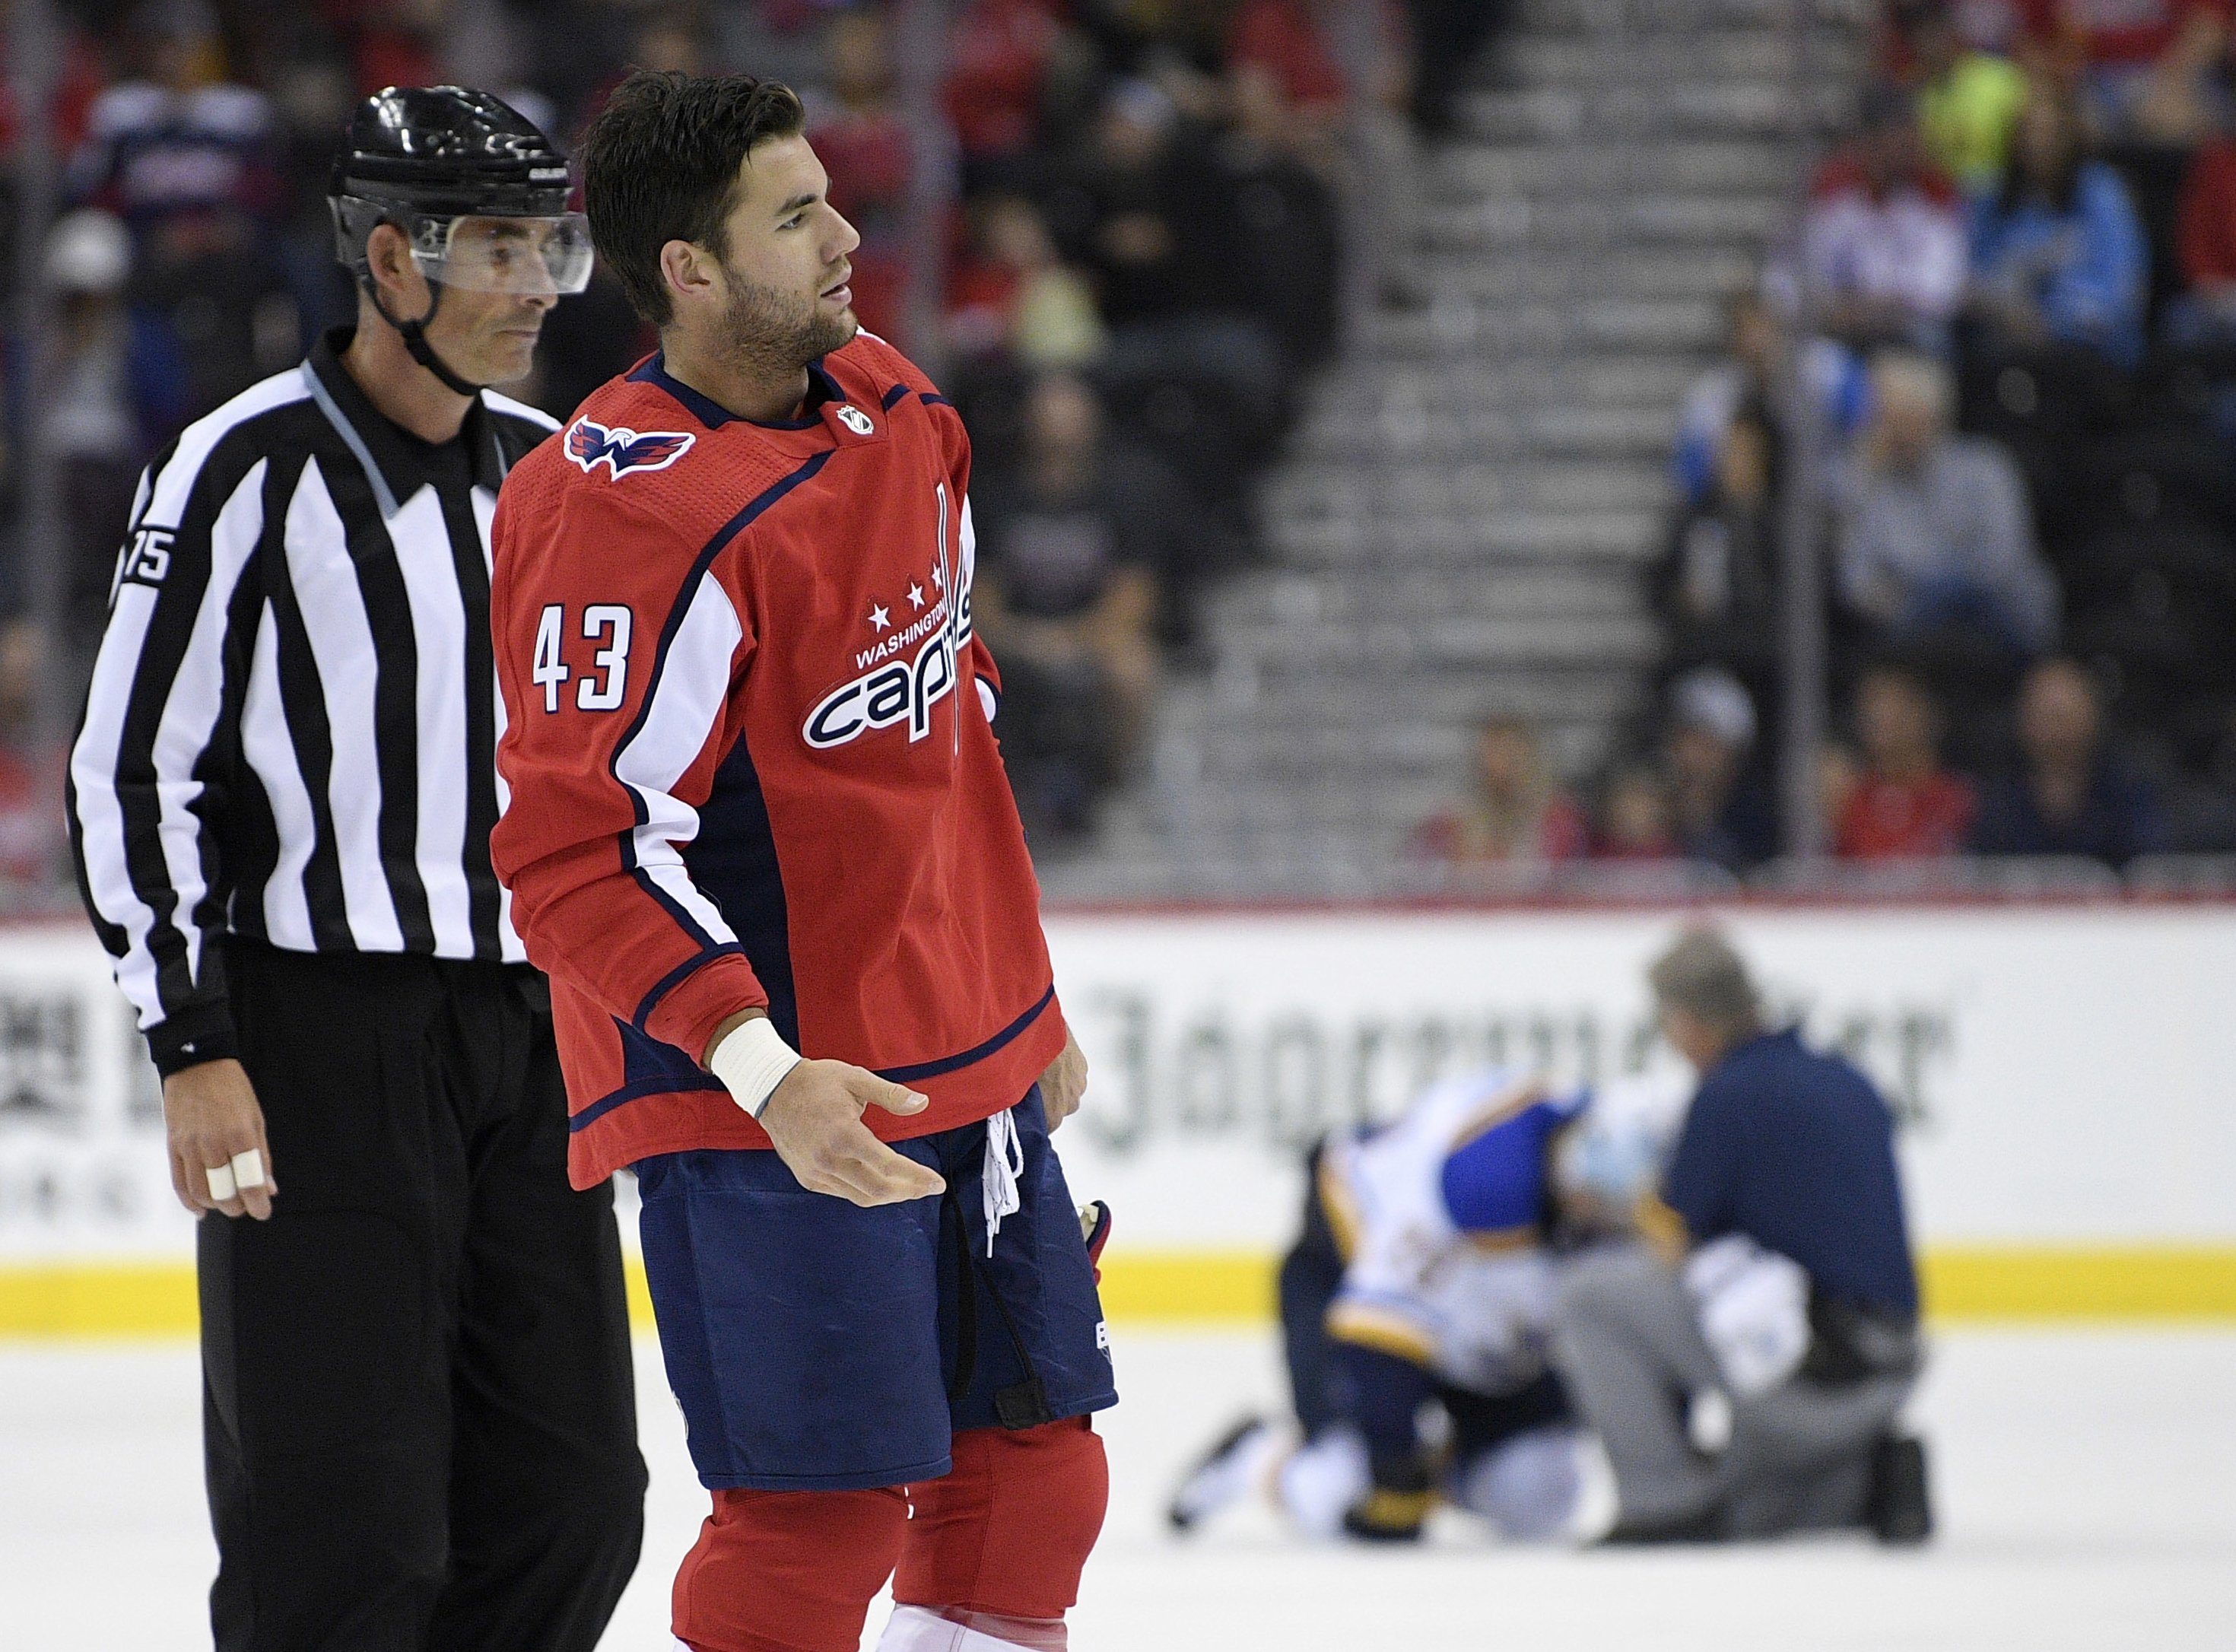 Capitals winger Tom Wilson banned 20 